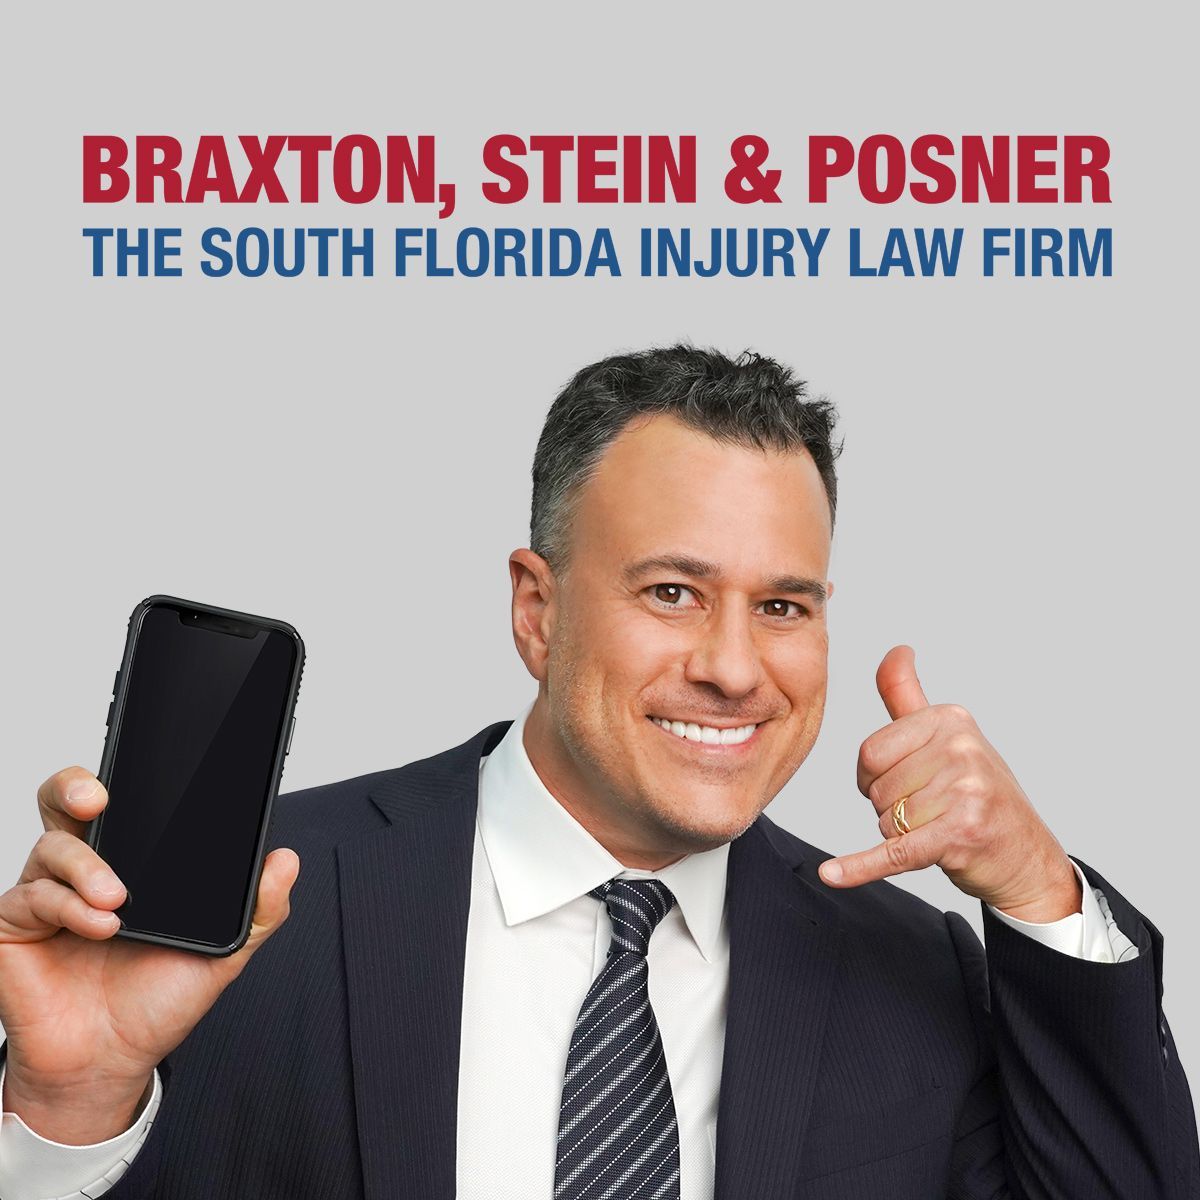 Protect yourself by acquiring the legal guidance of a local Ft. Lauderdale attorney with 25+ years of experience handling personal injury claims. 

Call or text Jeff Braxton’s cell anytime today at 954-488-JEFF 📲. 

#personalinjury #attorney #lawyer #personalinjurylawyer